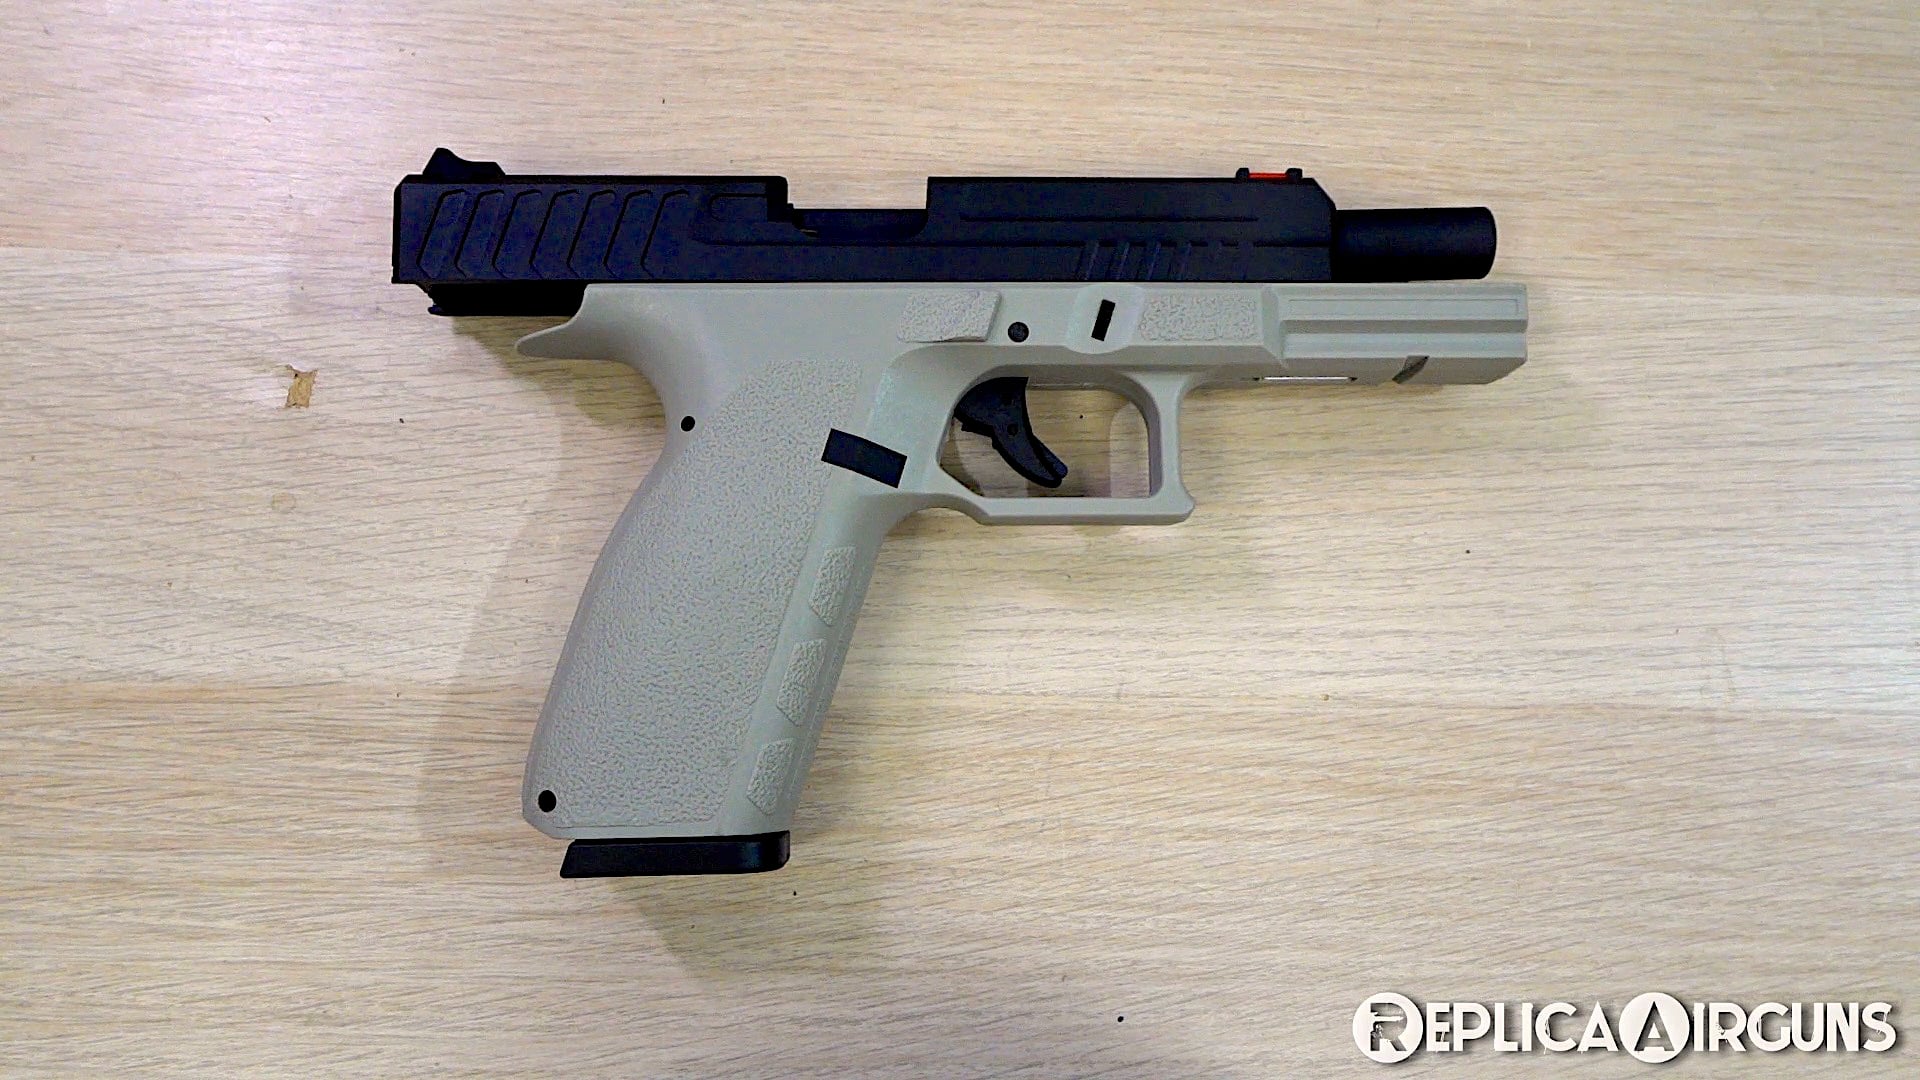 KJWorks KP-13 CO2 Blowback Airsoft Pistol Table Top Review